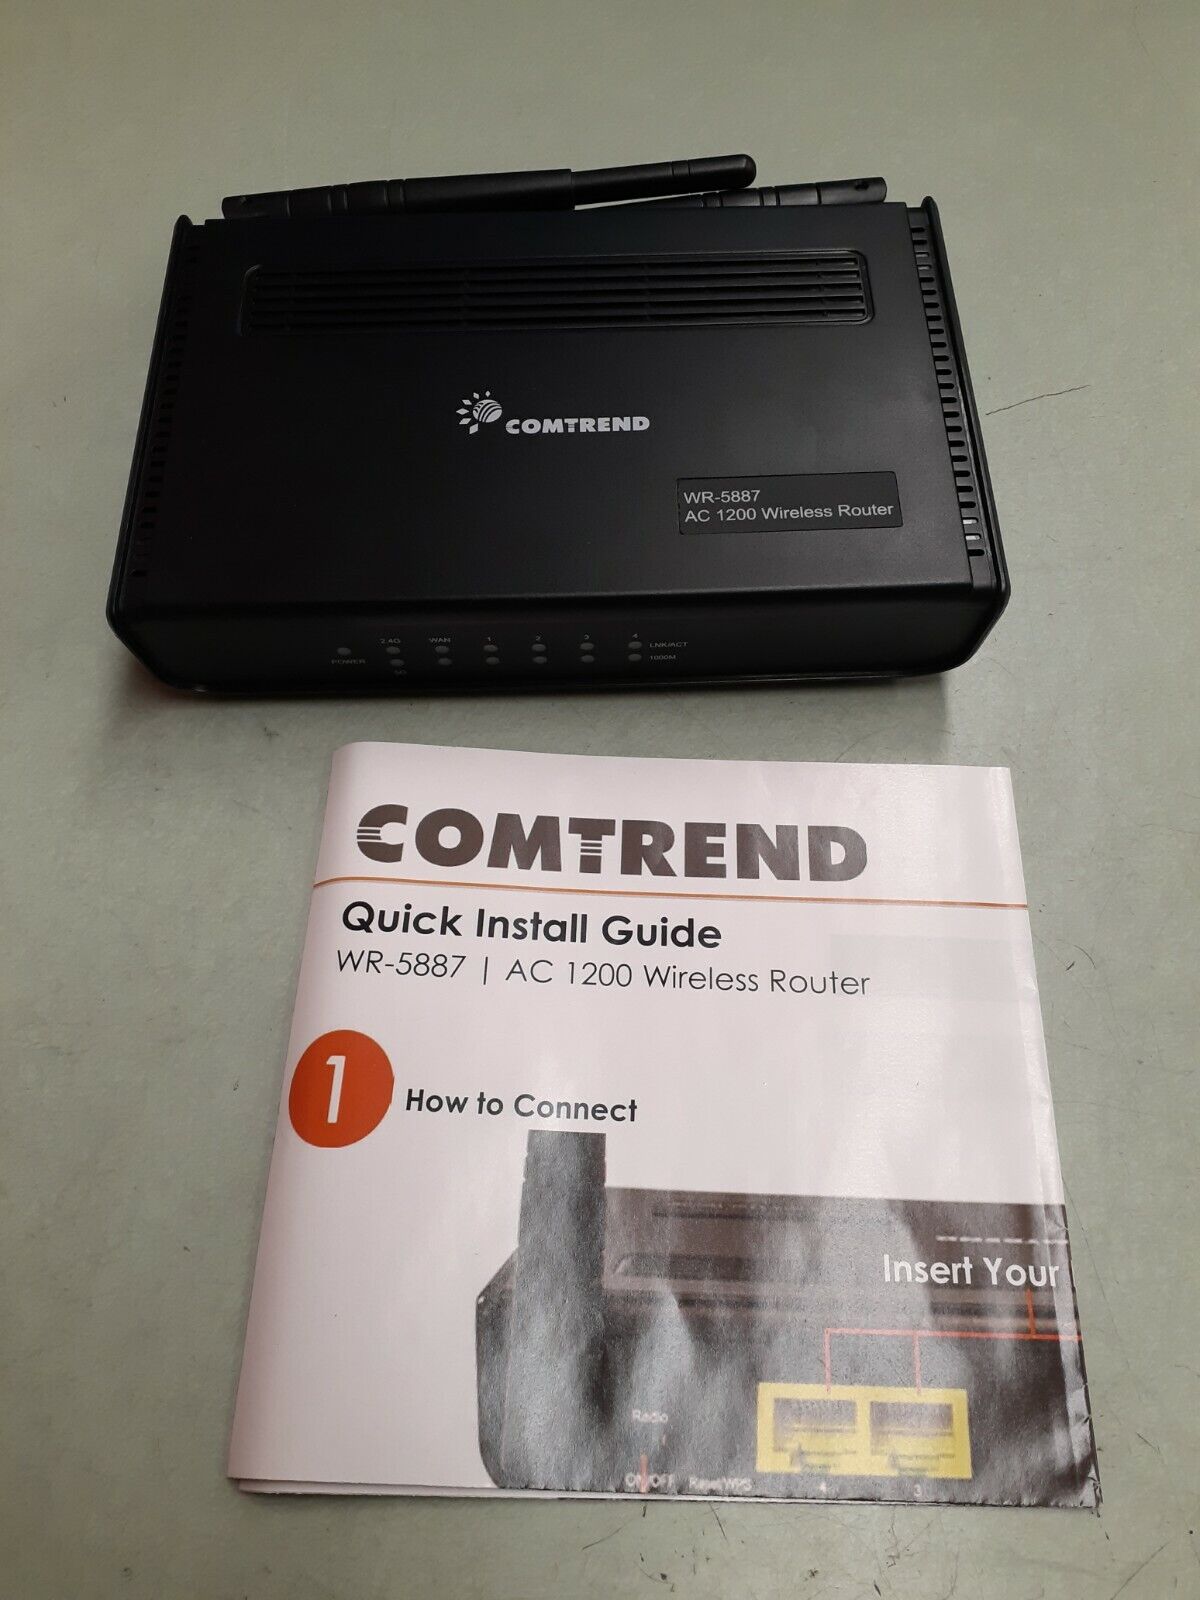 Comtrend WR-5887 AC1200 Wireless Router + Installation Guide